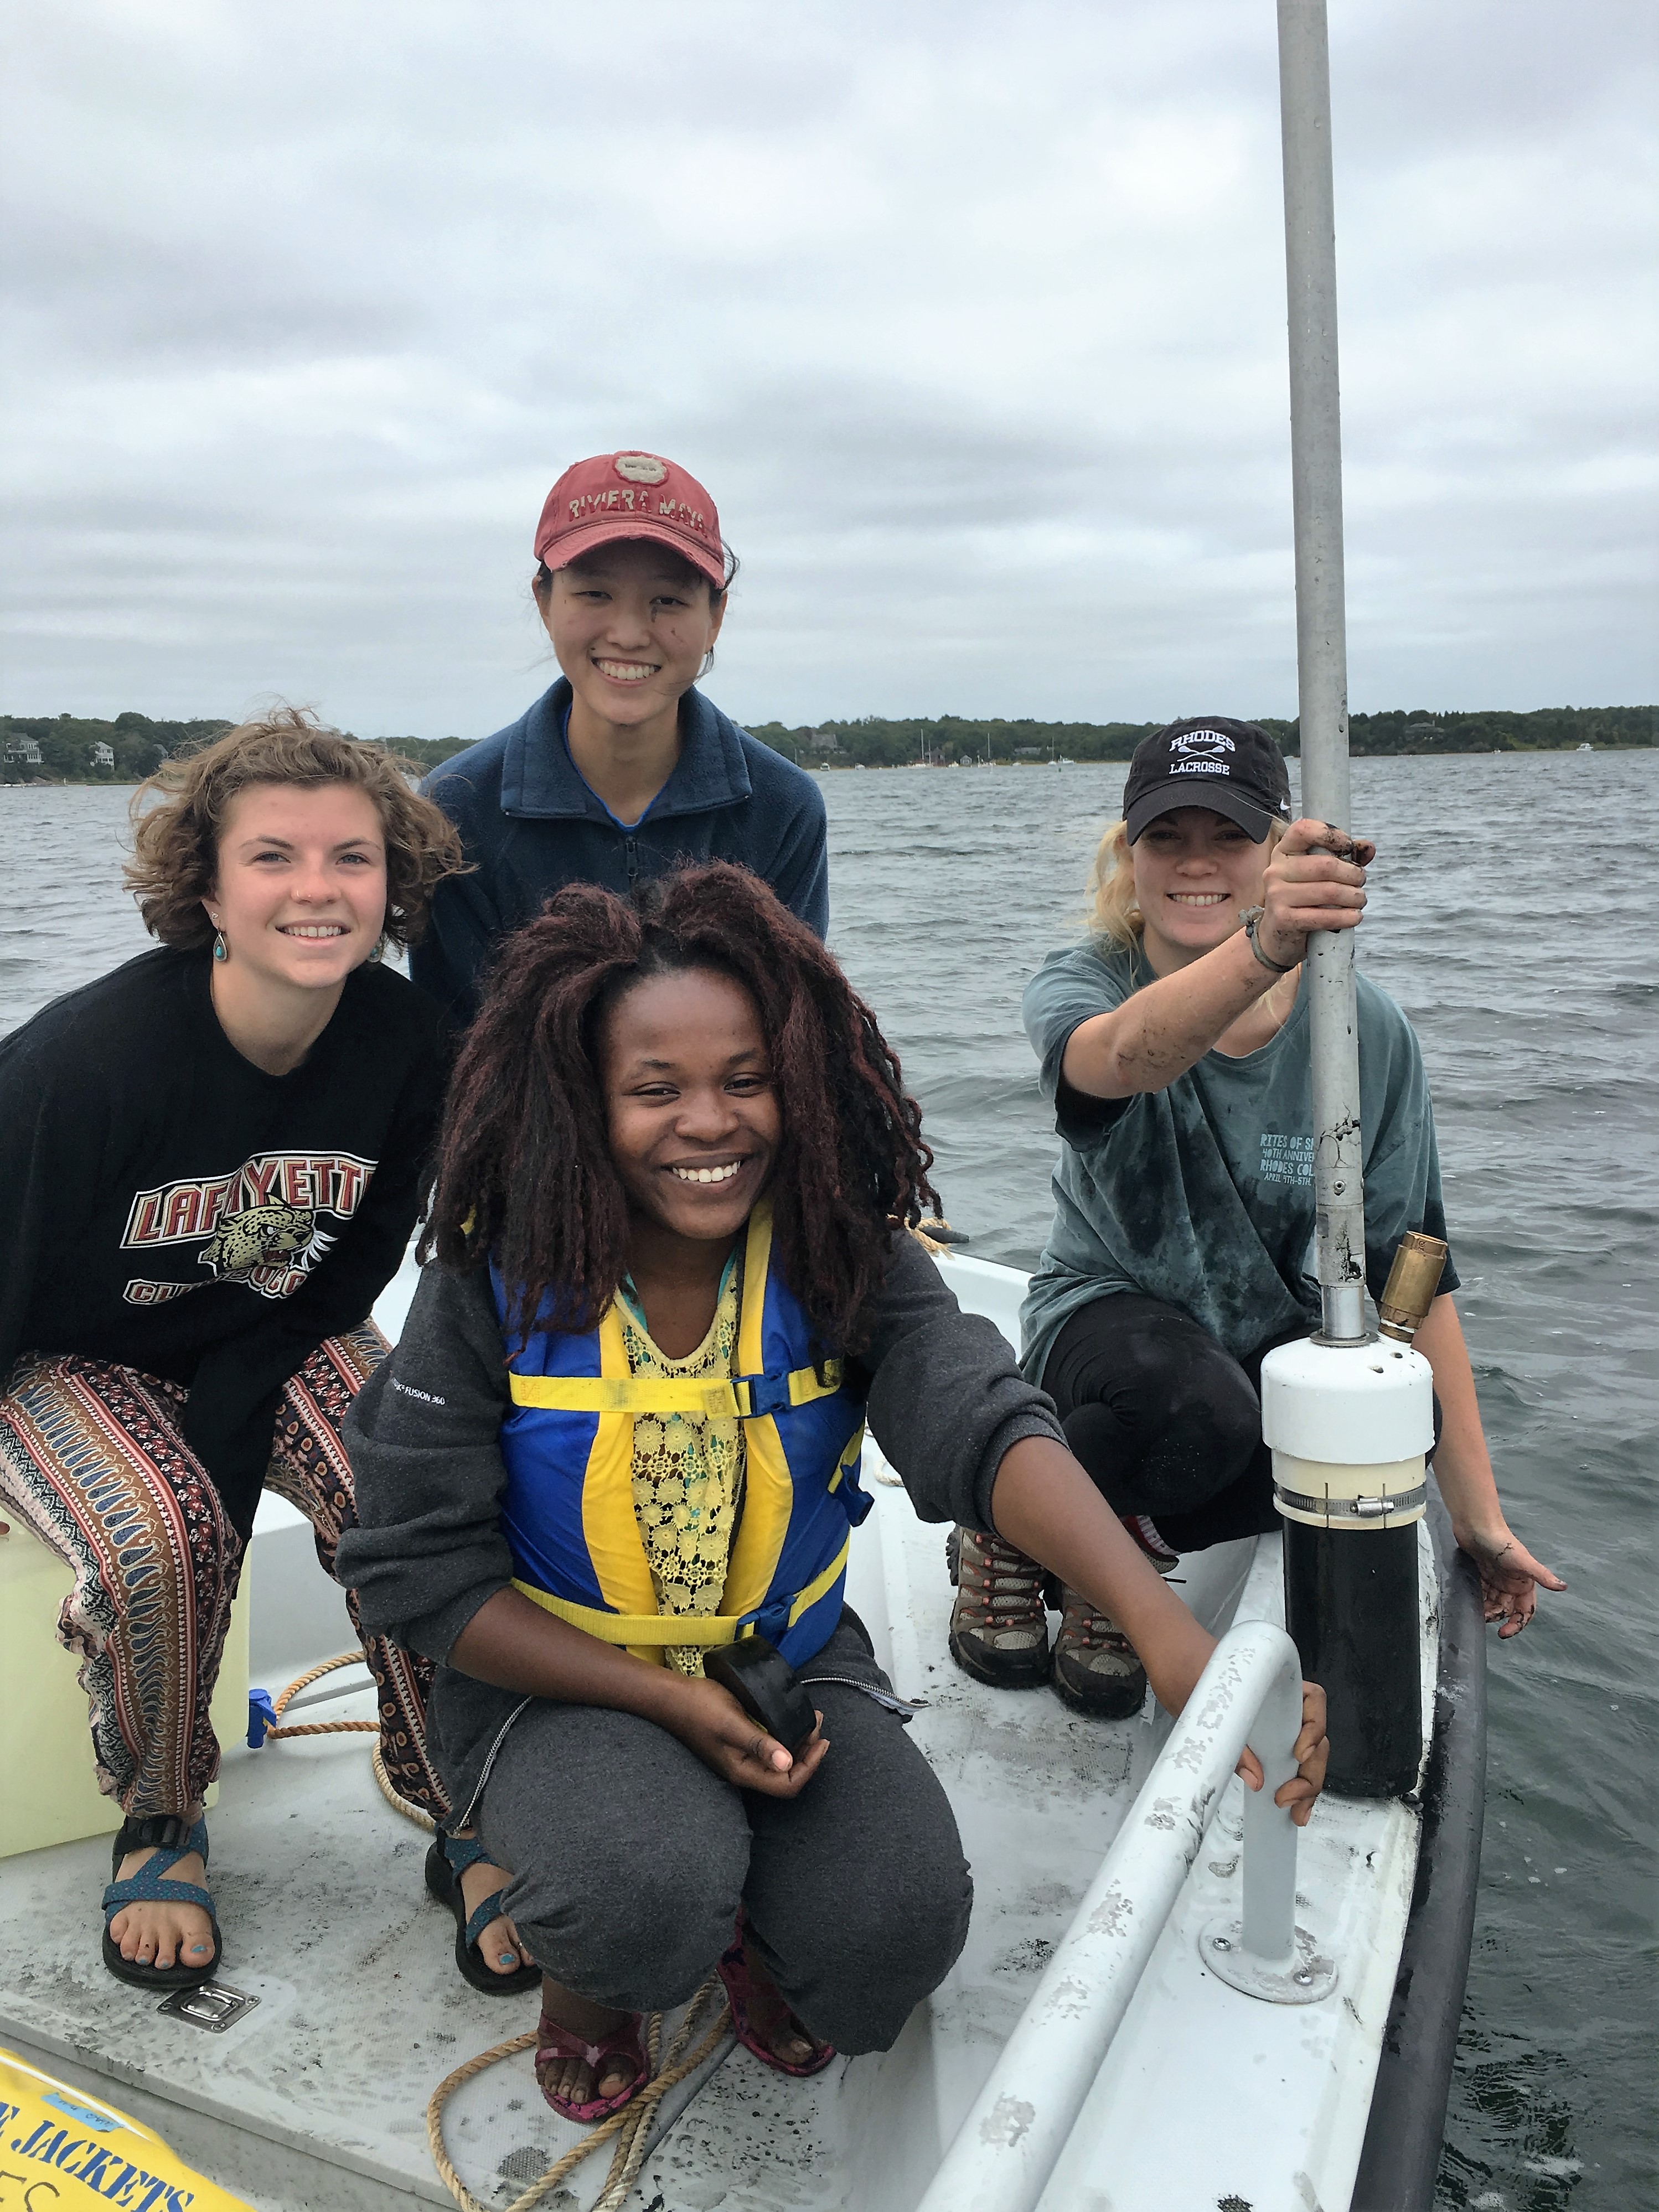 Semester in Environmental Science (SES) students taking core samples in Waquoit Bay, Falmouth, in 2016. From left: Misty Earisman (Lafayette College), Hannah Gershone (Mount Holyoke College, standing), Catherine Ballali (Earlham College, kneeling) and Erin Gleeson (Rhodes College). Credit: Alison Maksym